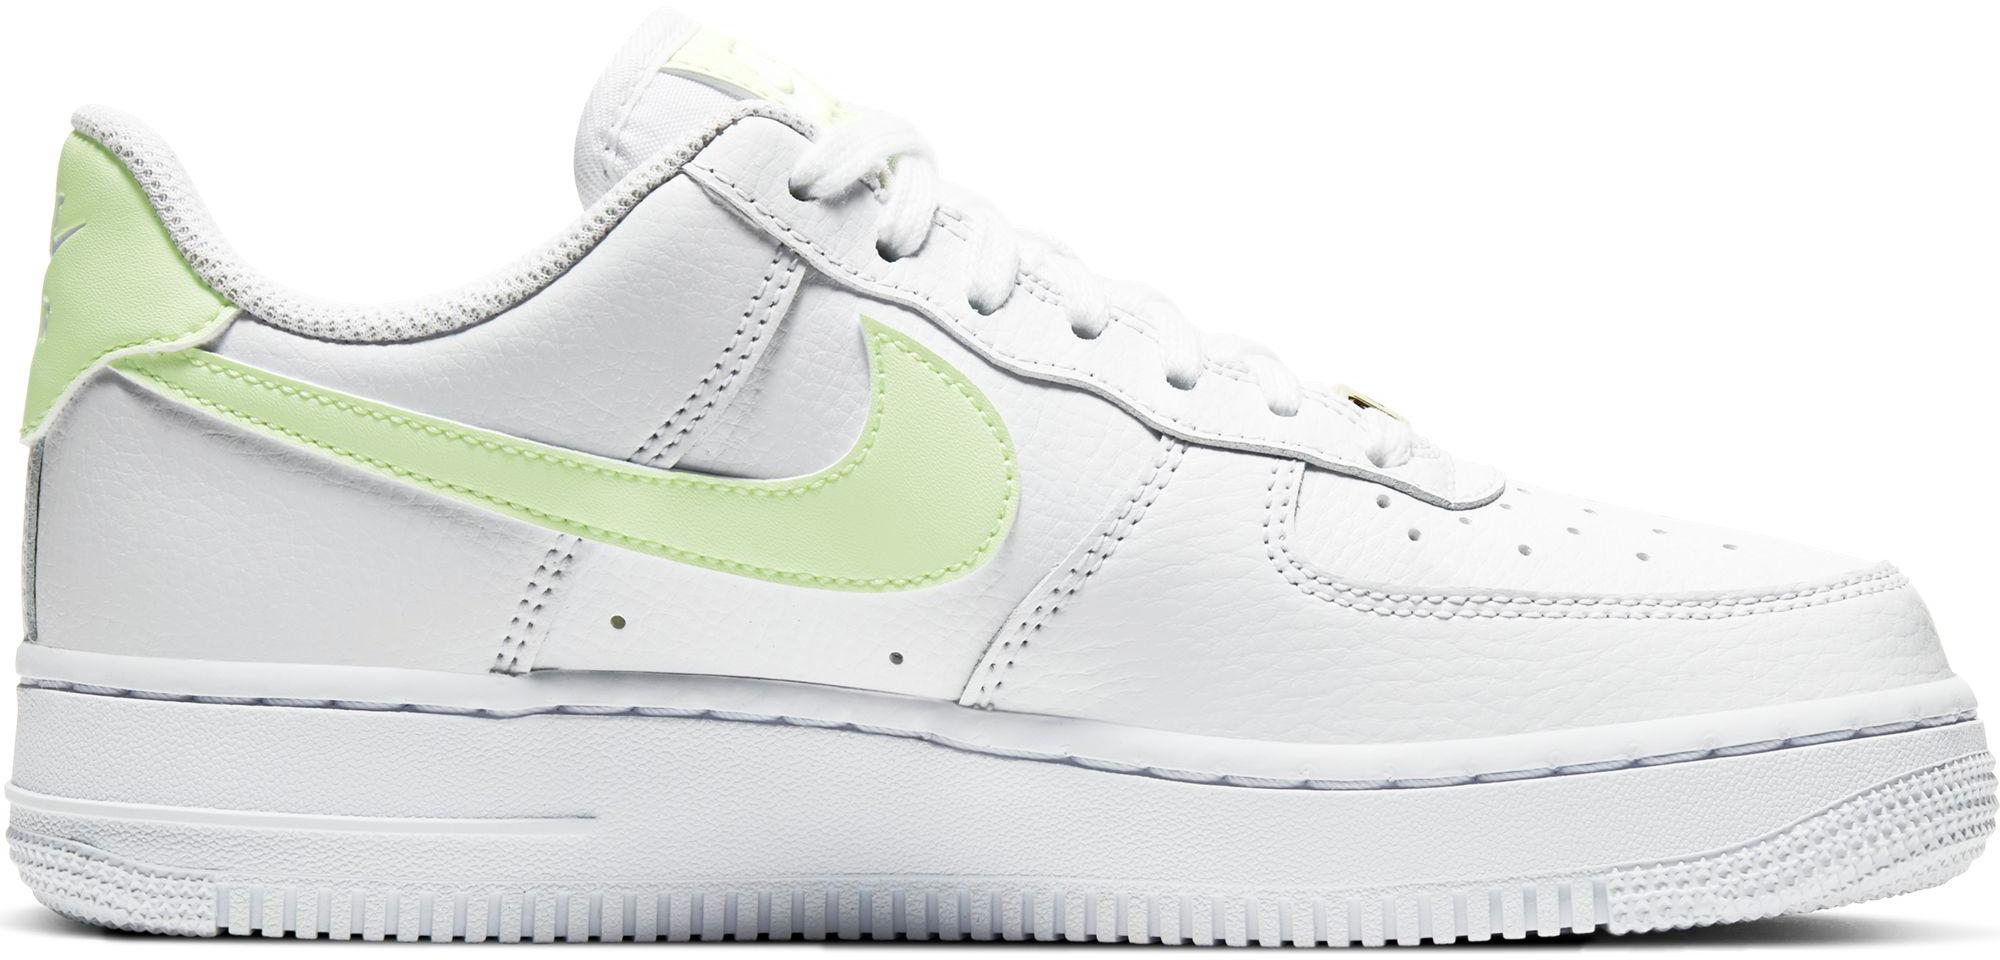 the white air force ones